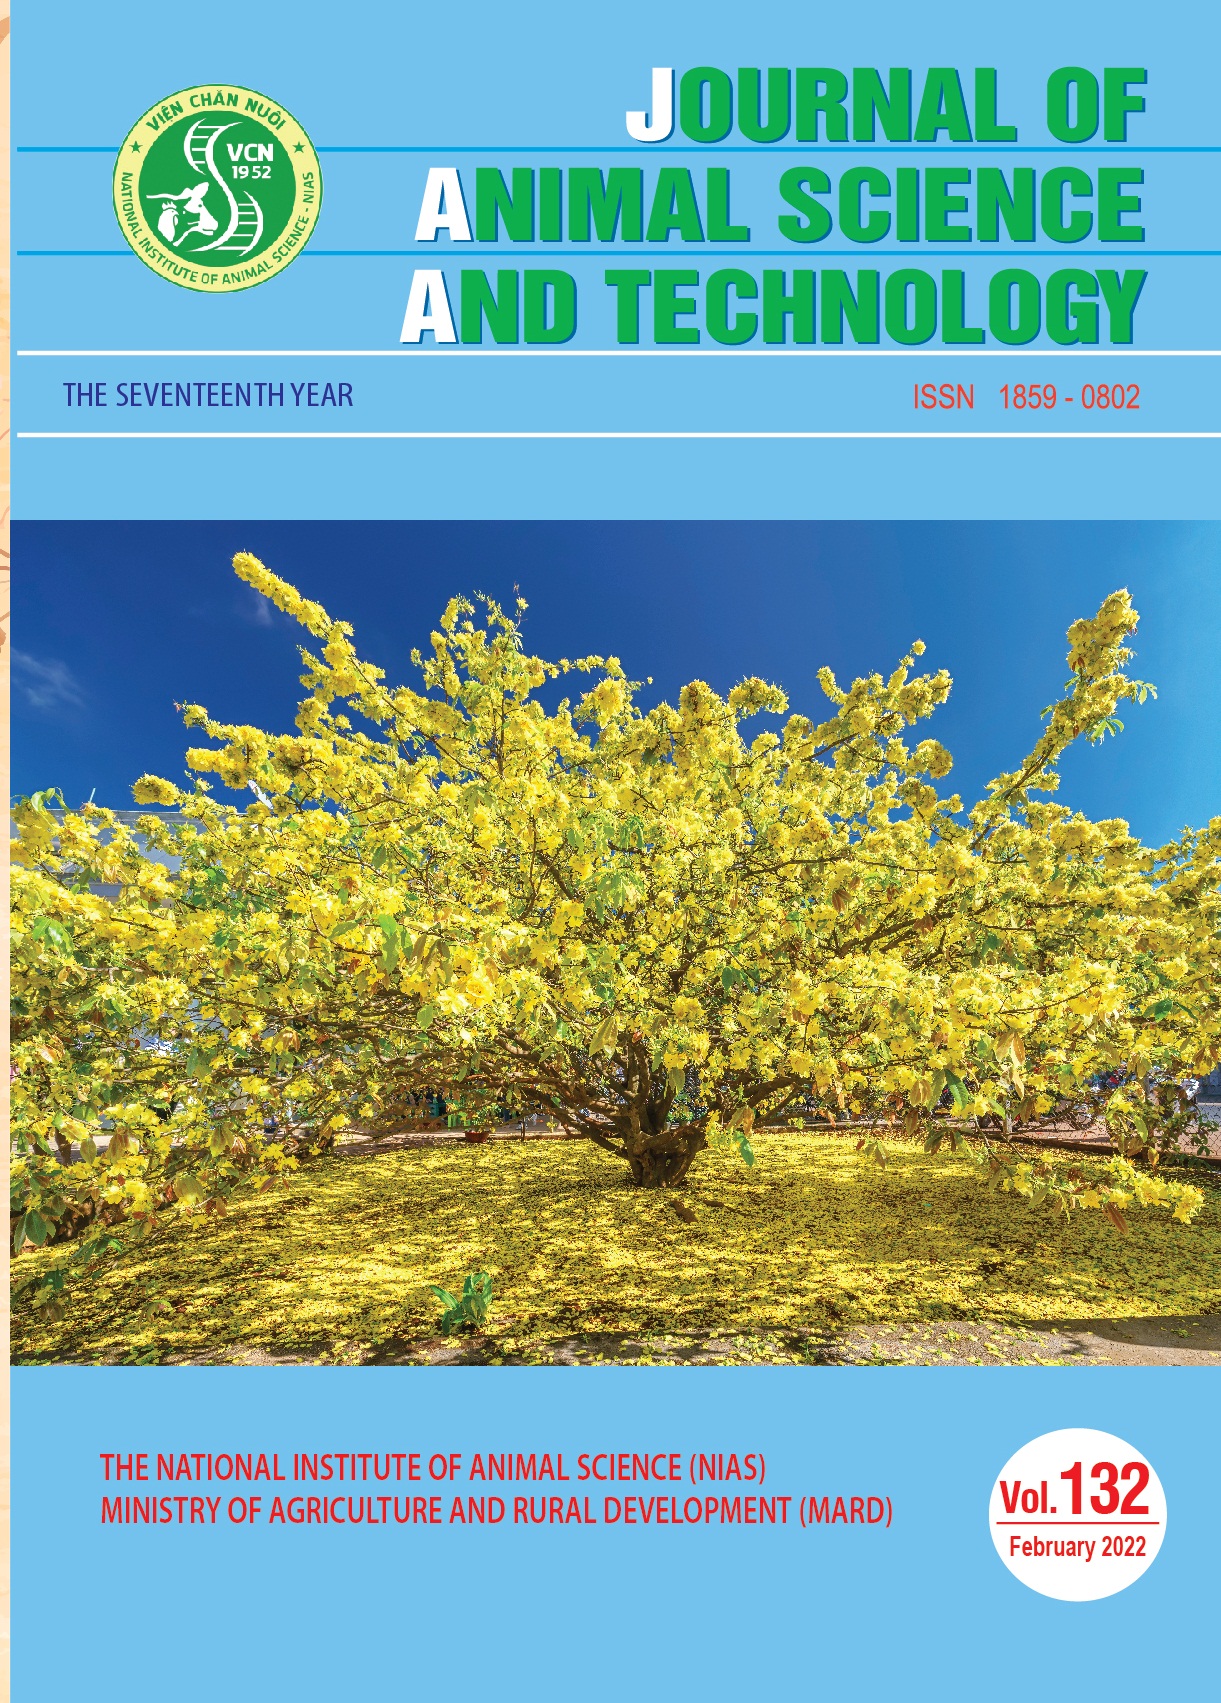 Journal of Animal Science and Technology – Vol 132. February, 2022